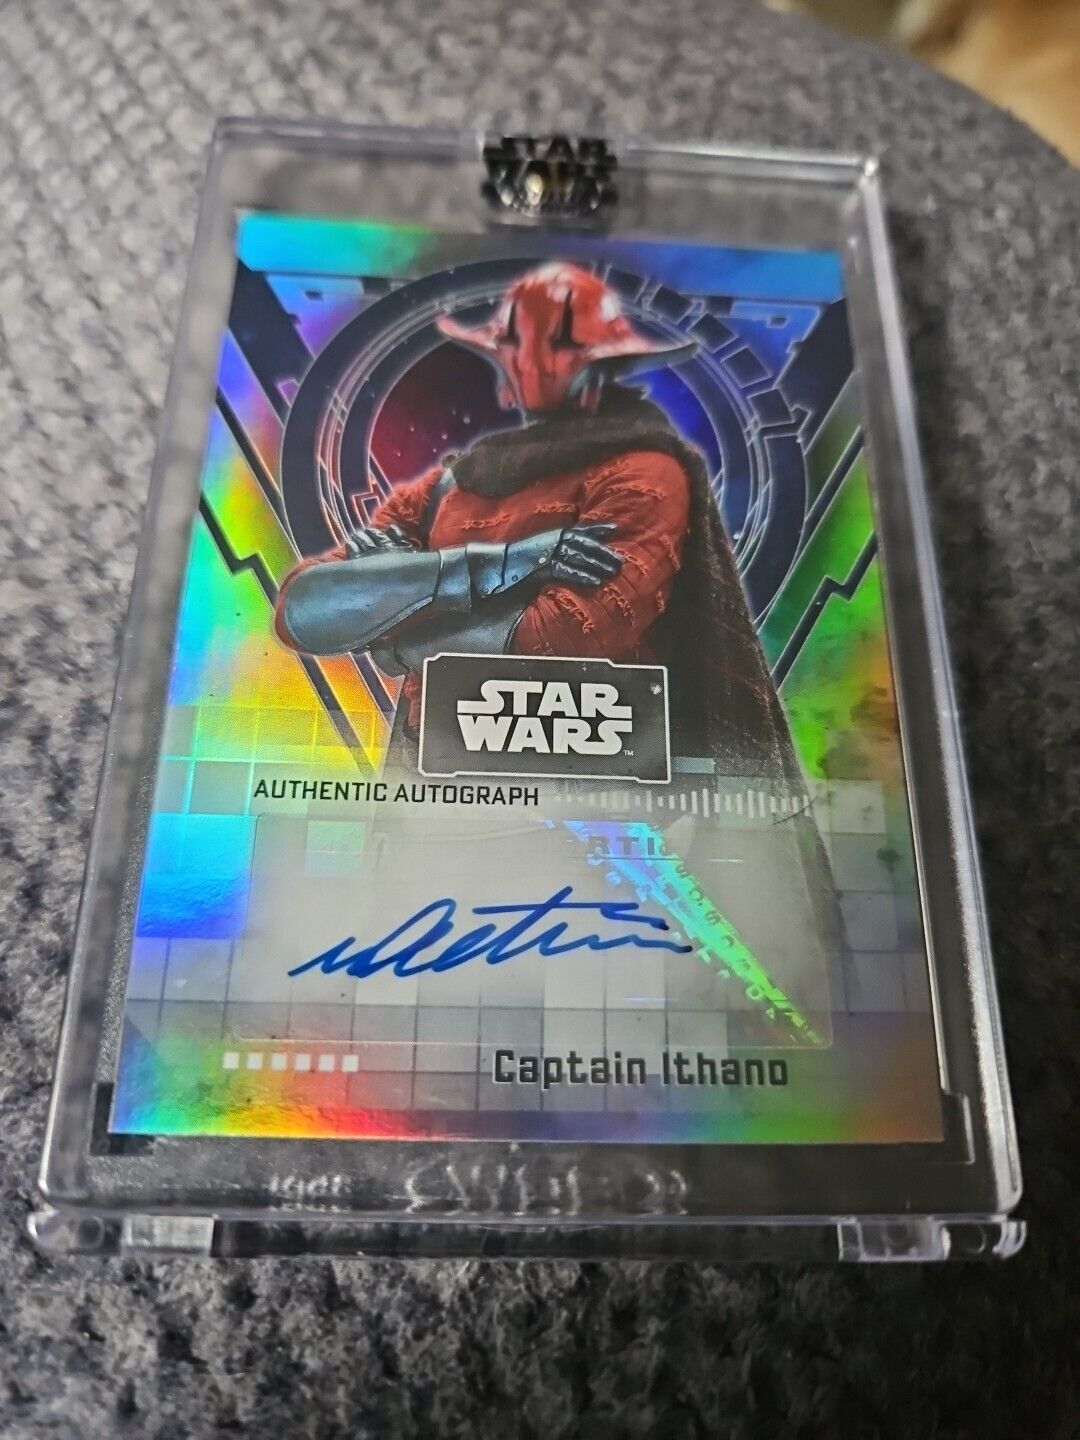 Topps Star Wars Signature Edition Dee Tails Auto Autograph Captain Ithano